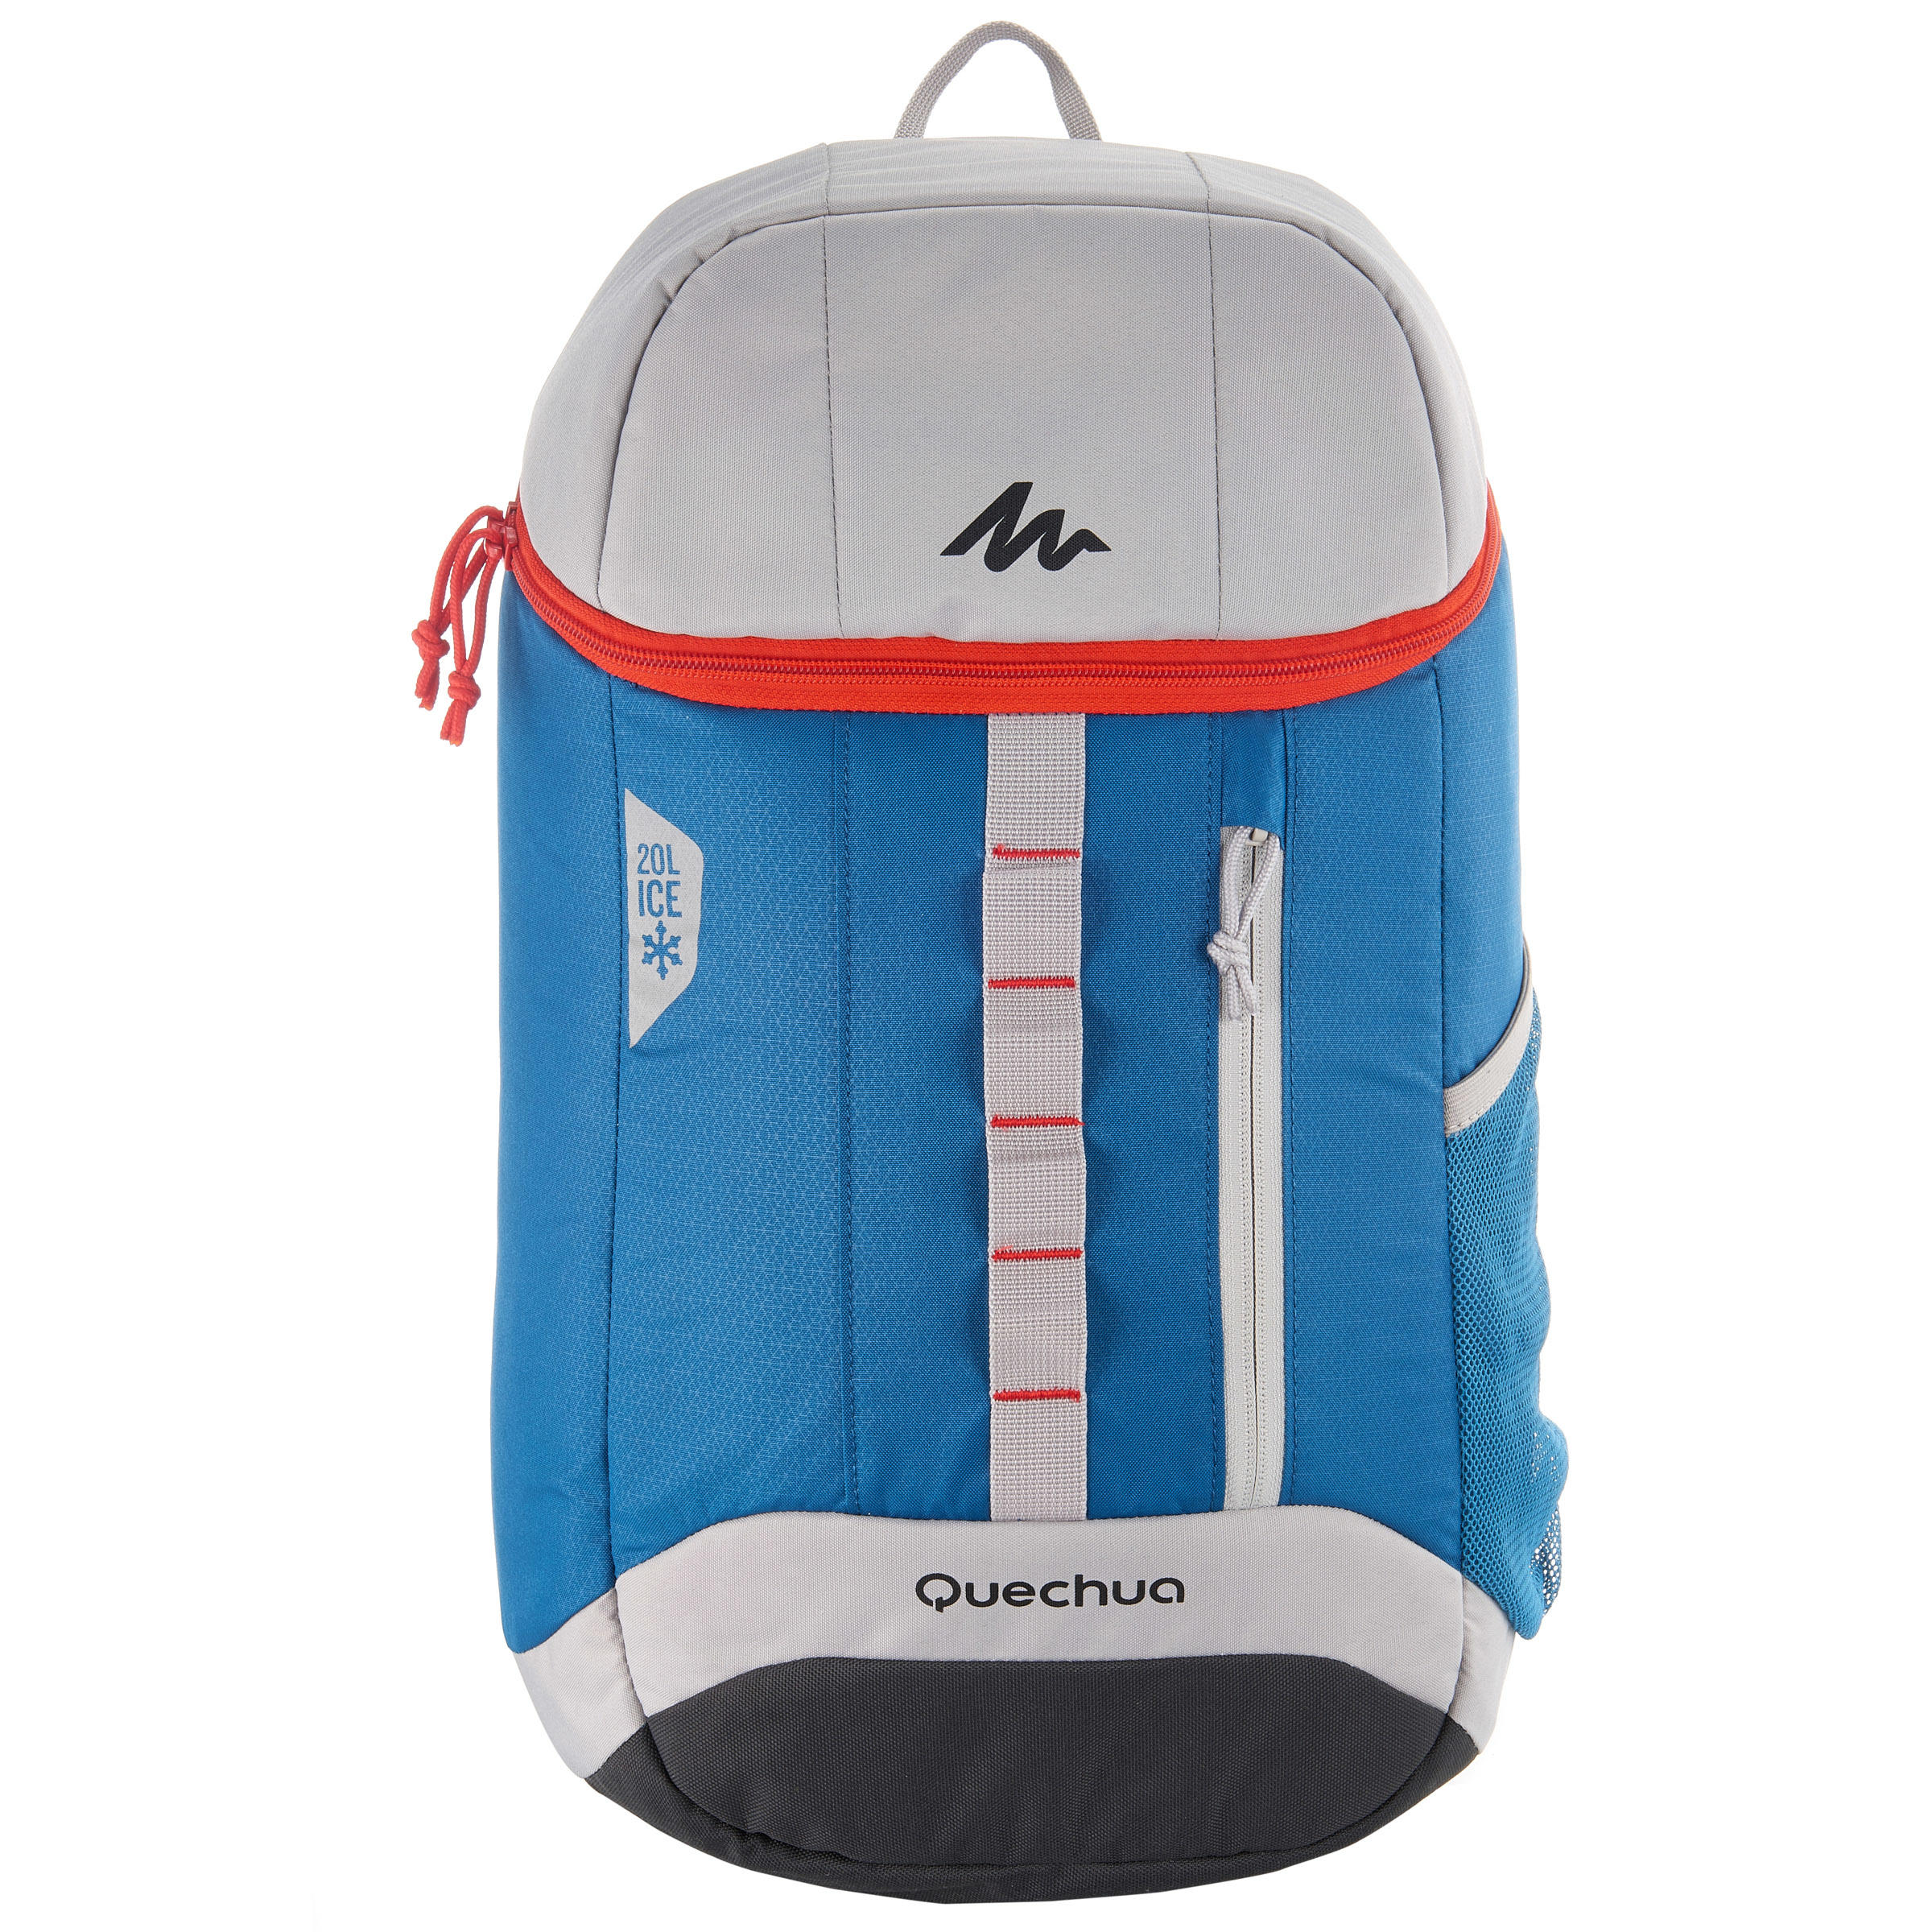 Ice Isothermal Walking Backpack - 20 litres 5/14